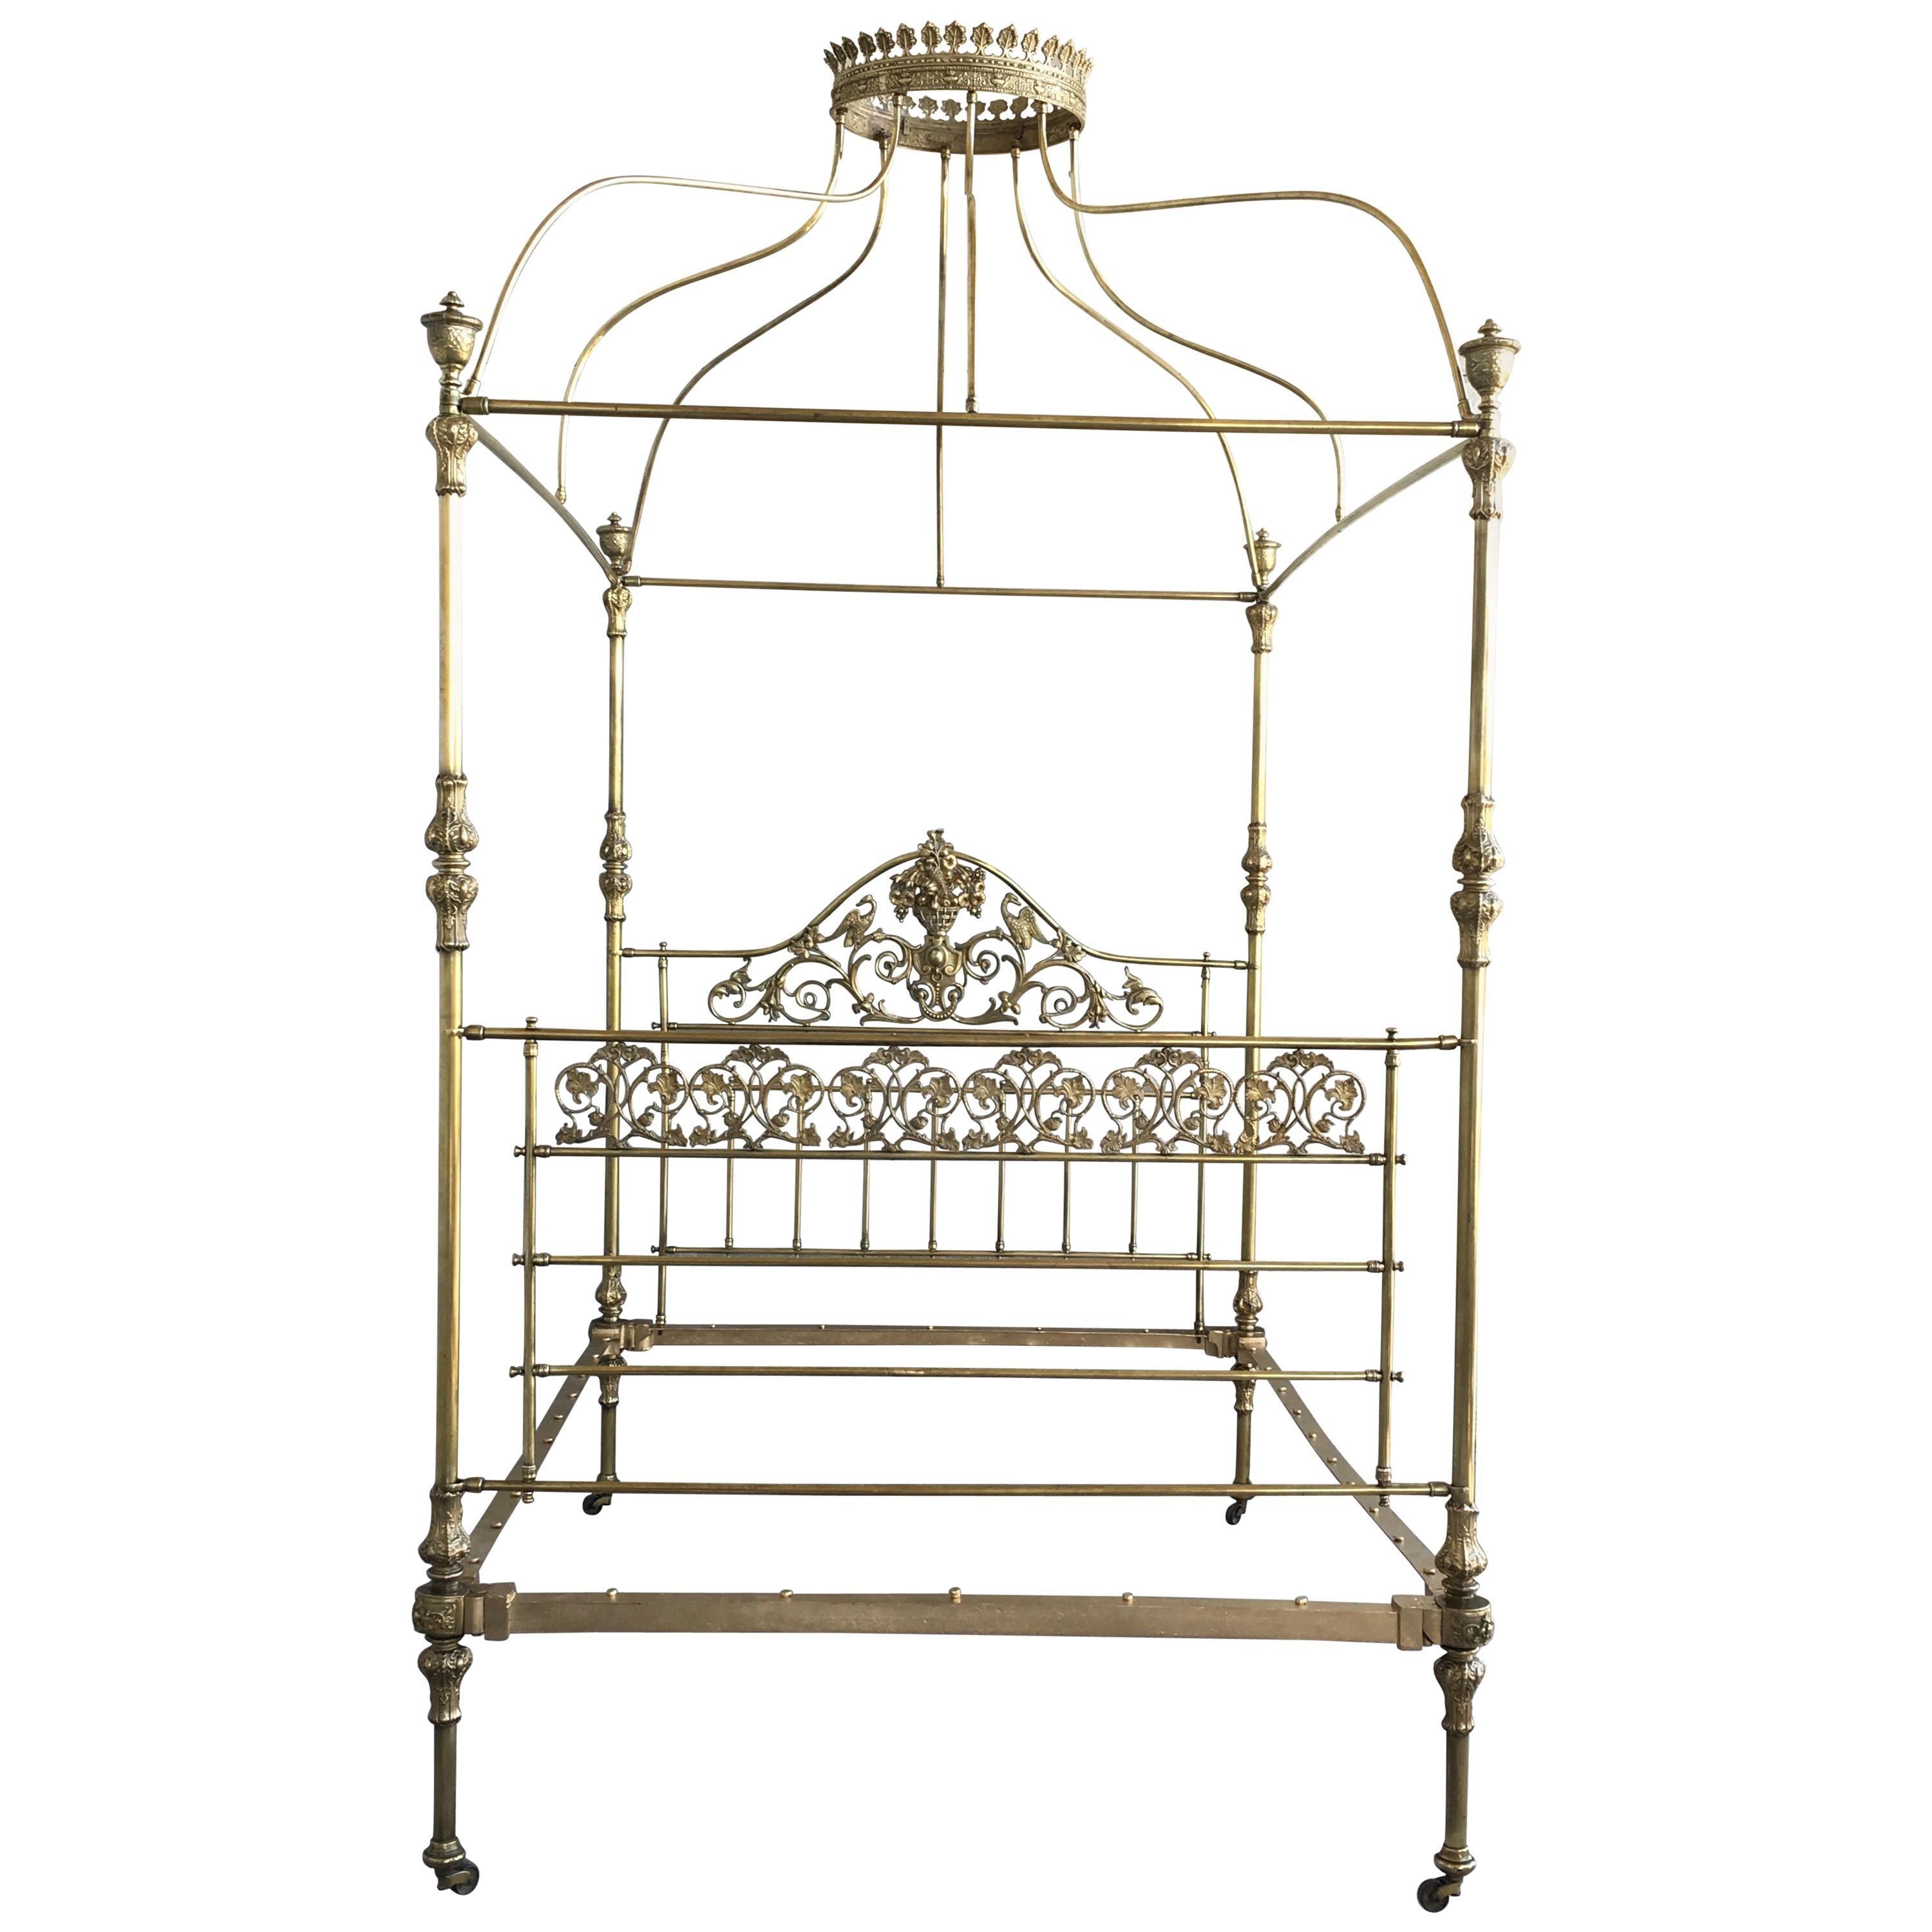 Wide Brass Four Poster Bed with Bird Castings, Ornamental Motifs and Crown